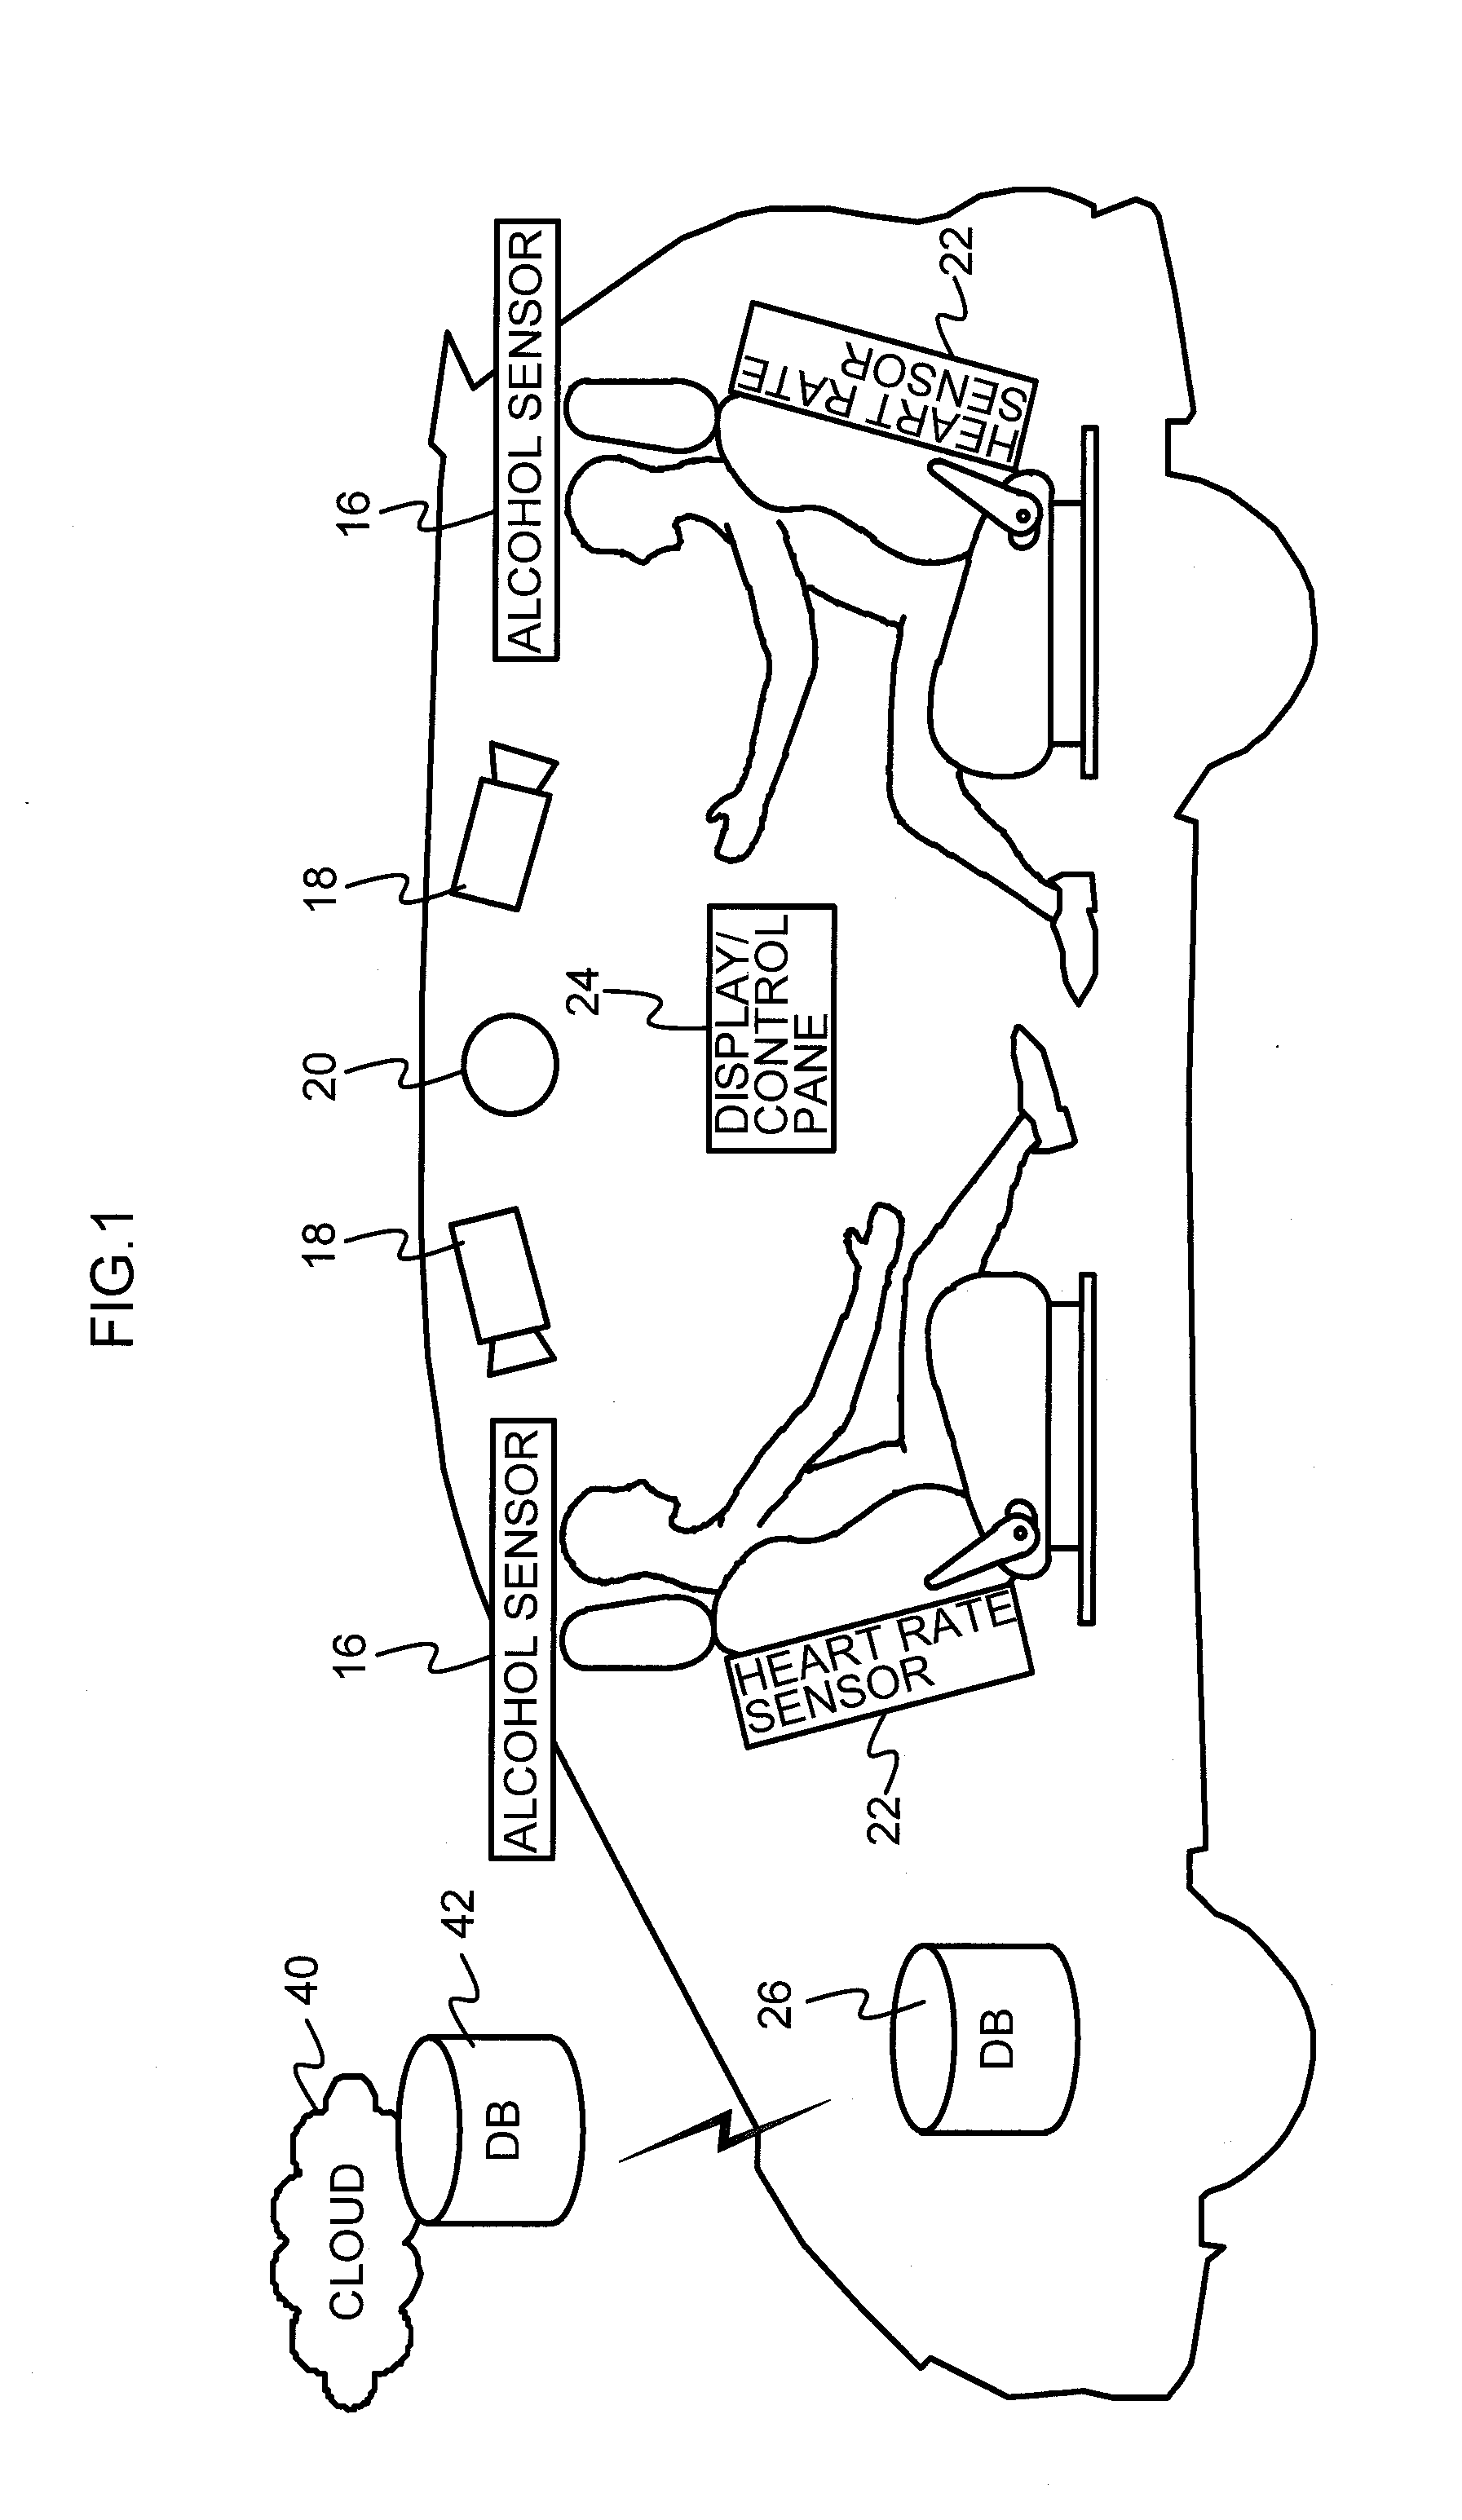 Vehicle occupant information acquisition device and vehicle control system